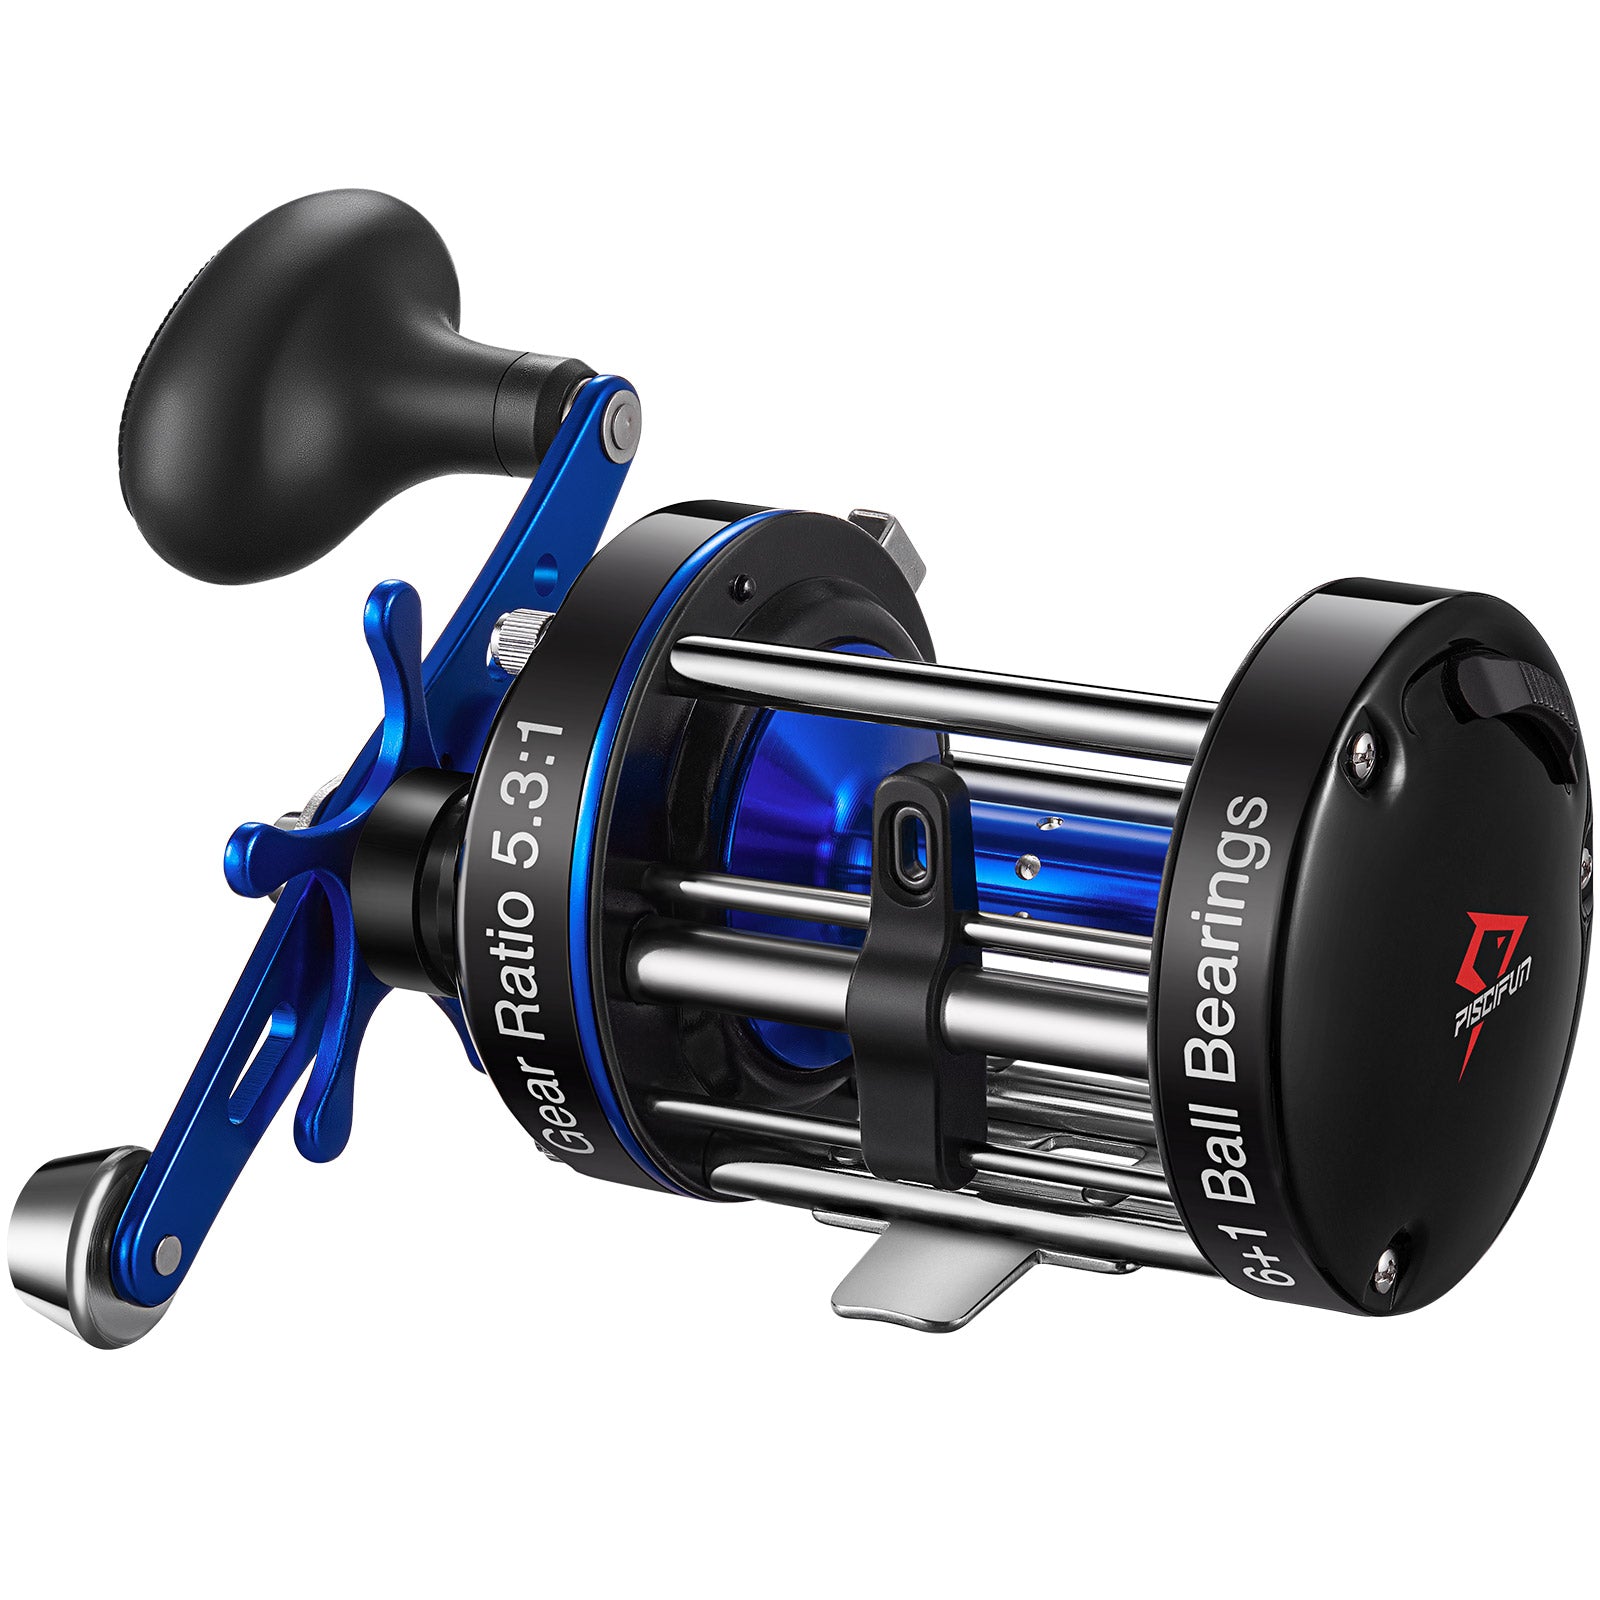 $50 Reel Piscifun Chaos XS50 Round Saltwater Fishing Reel is worth to Buy?  